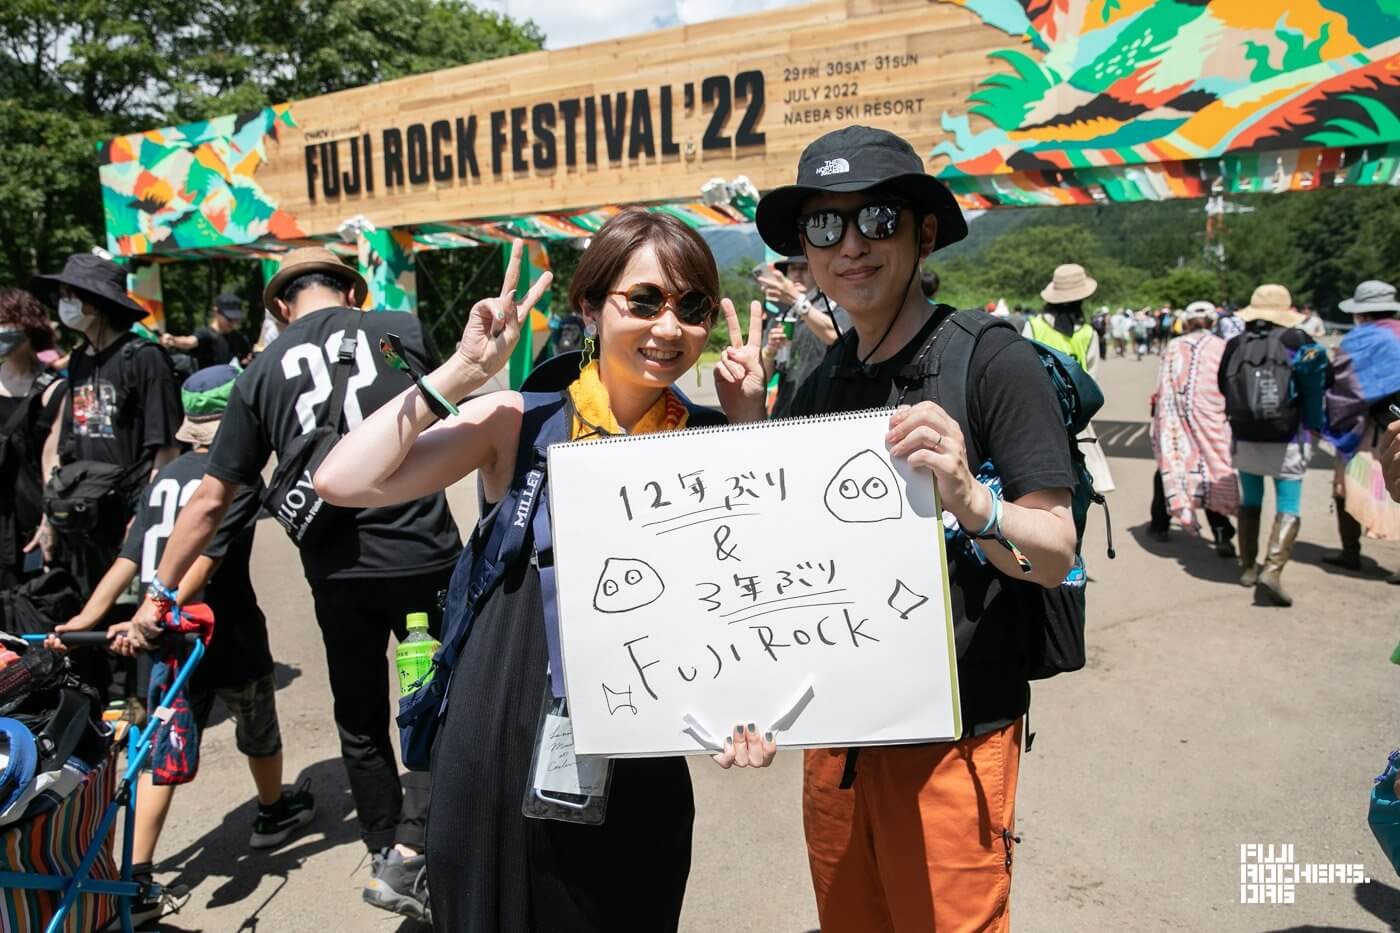 Message For FUJI ROCK13